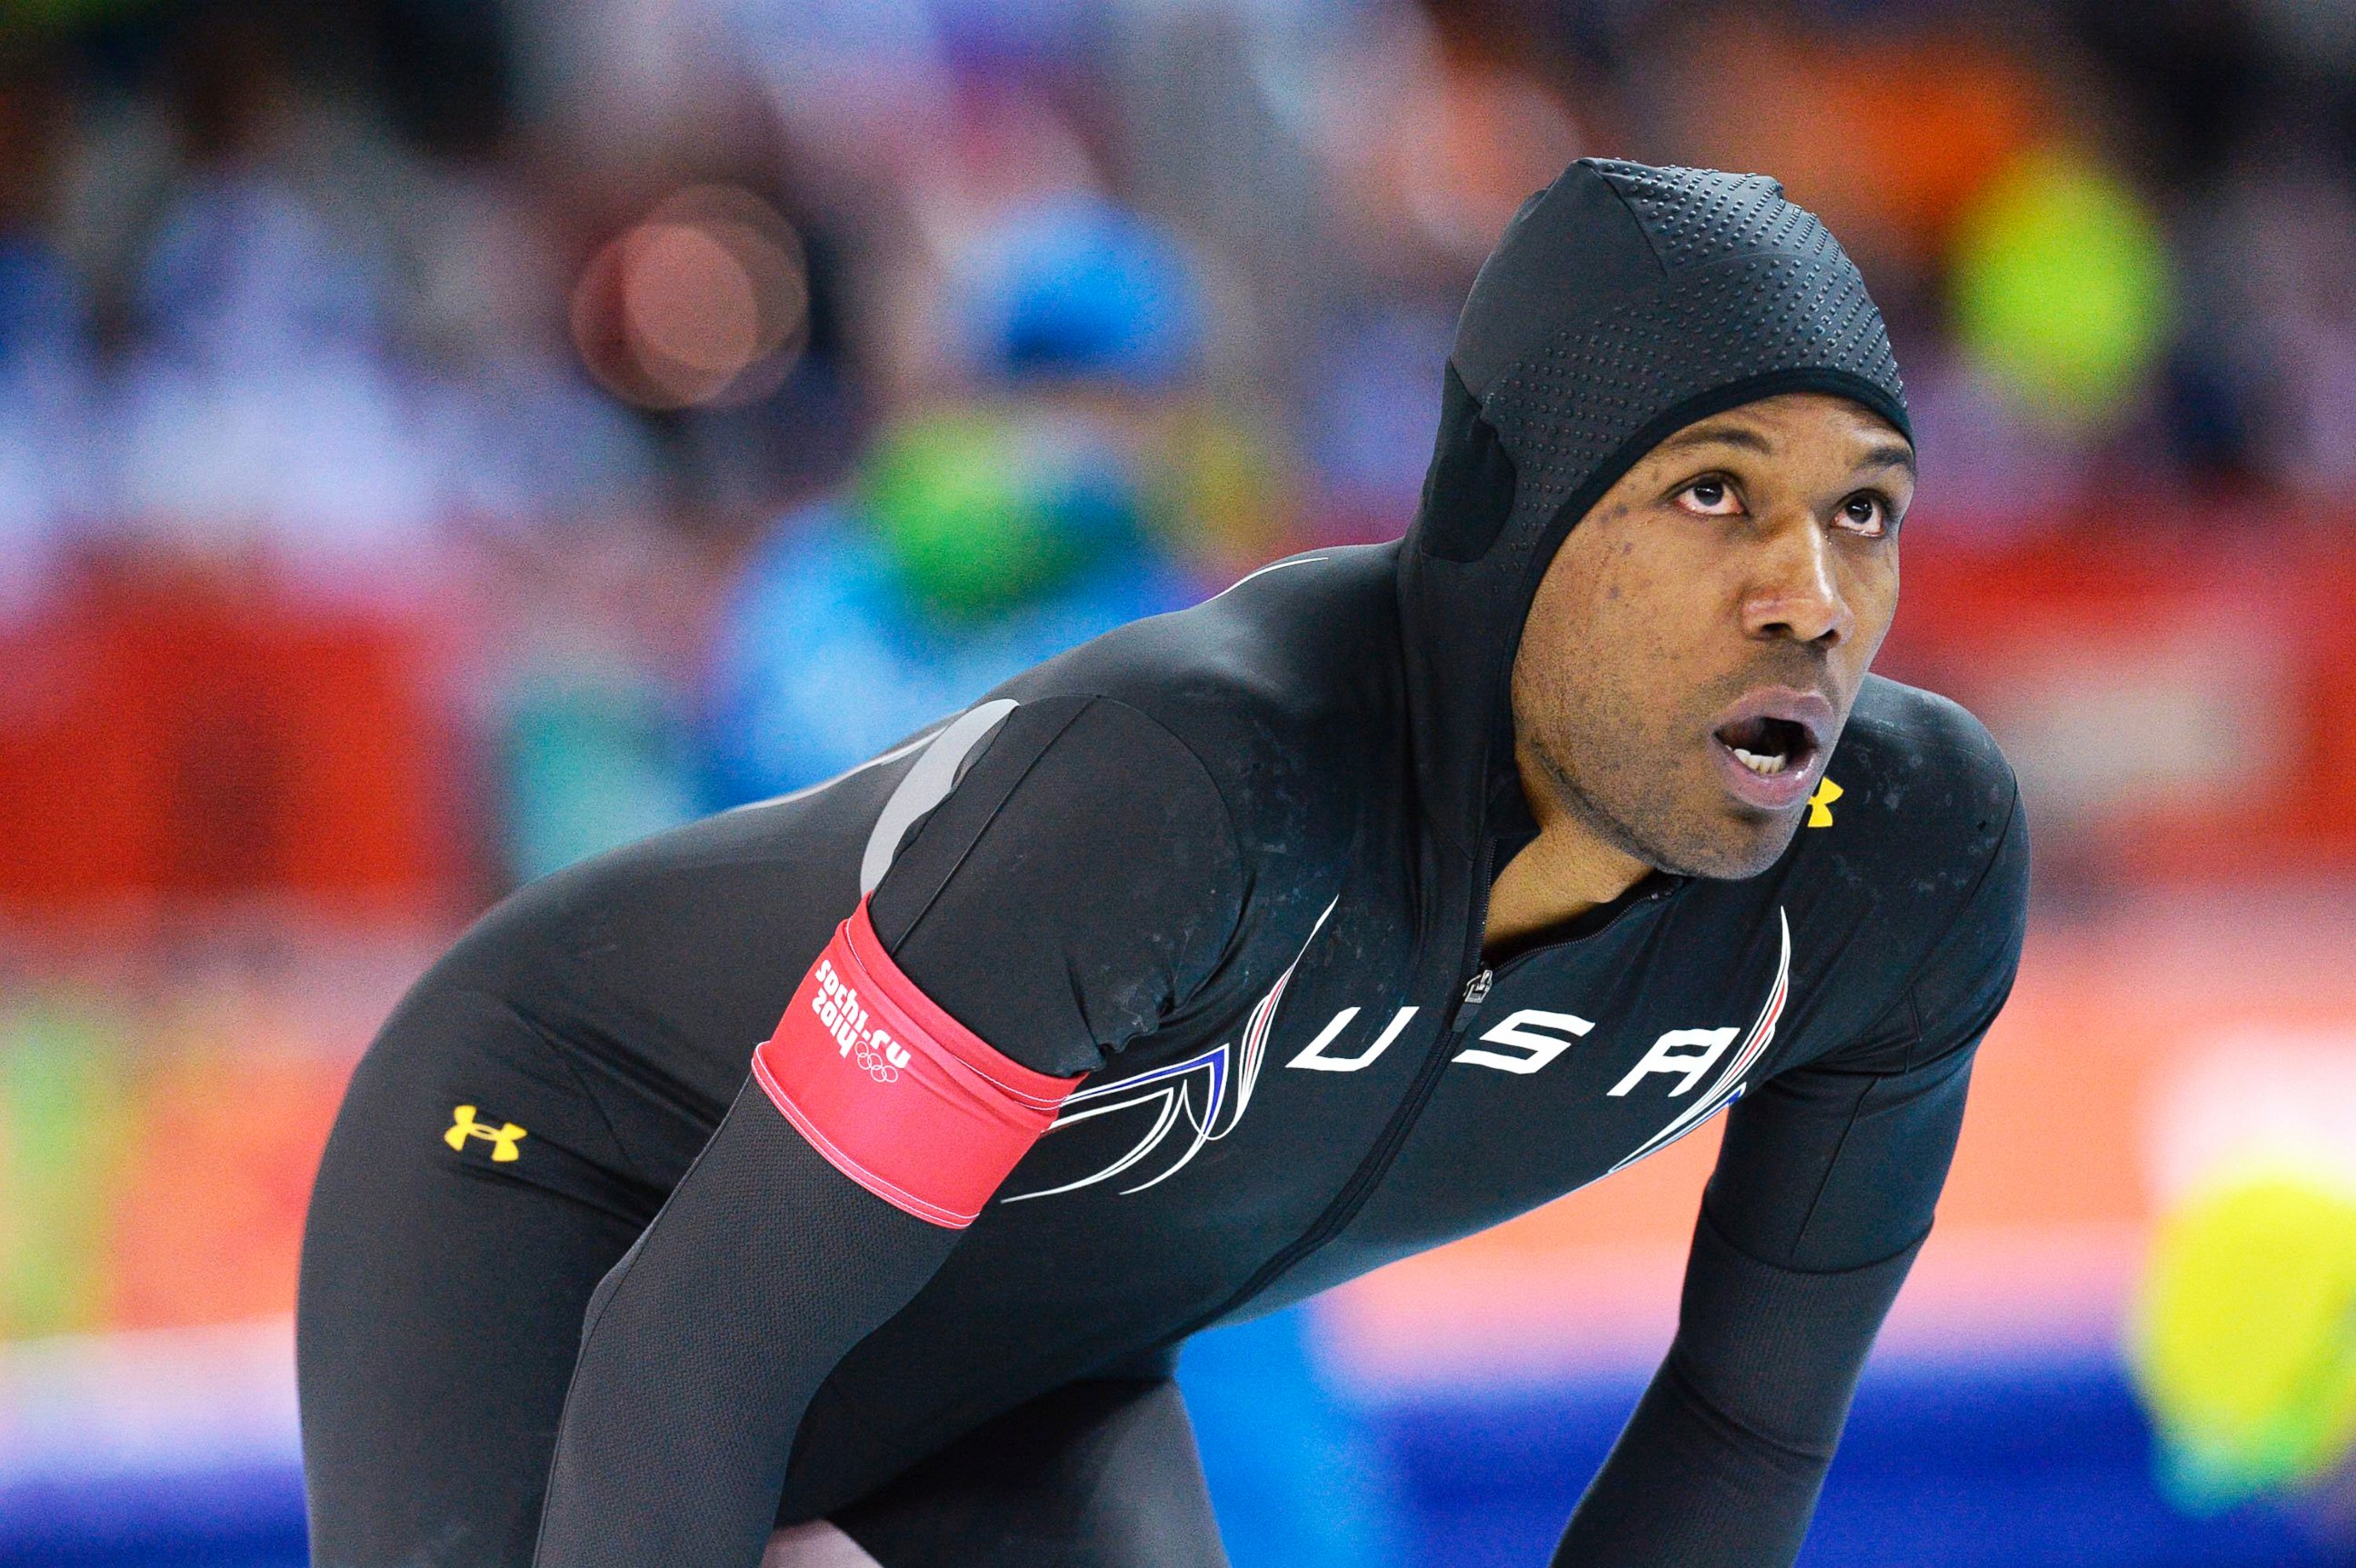 PHOTO: U.S. speed skater Shani Davis looks to the clock at the finish of the men's 1000-meters event during the Winter Olympics Feb. 12, 2014.  